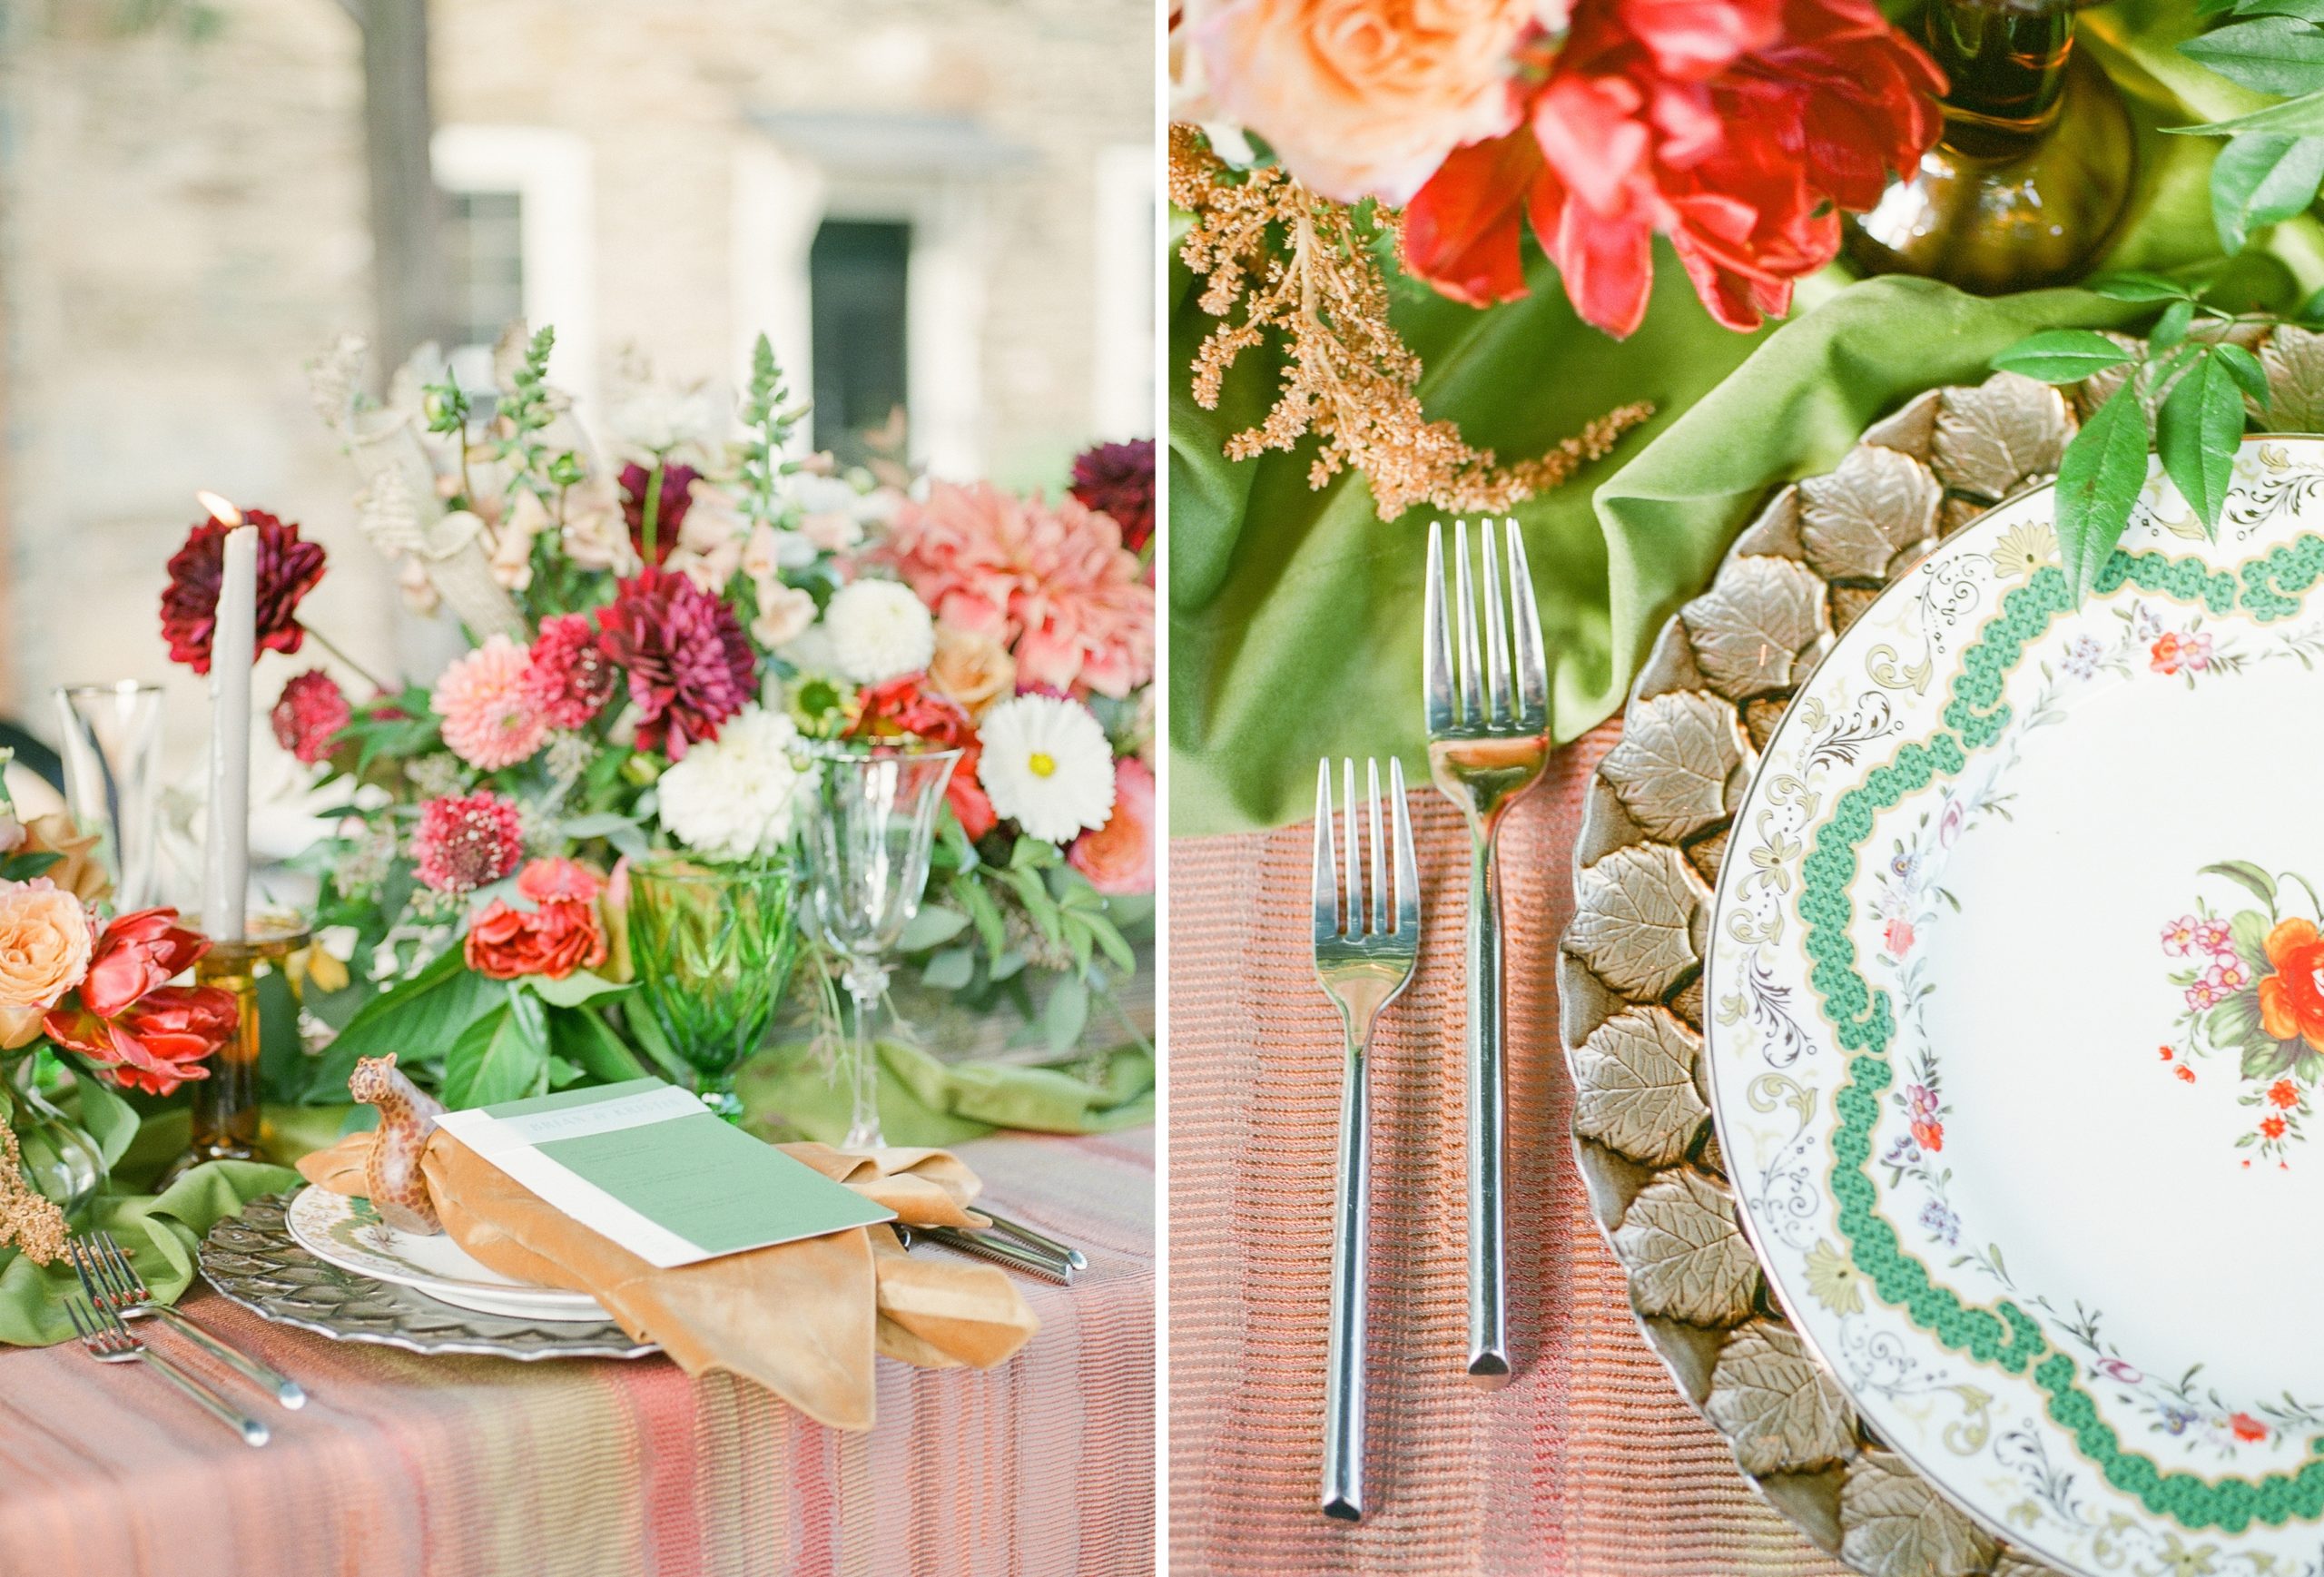 Washington, DC wedding photographer, Alicia Lacey captures this unique and subtle safari inspired wedding decor from SRS Events.